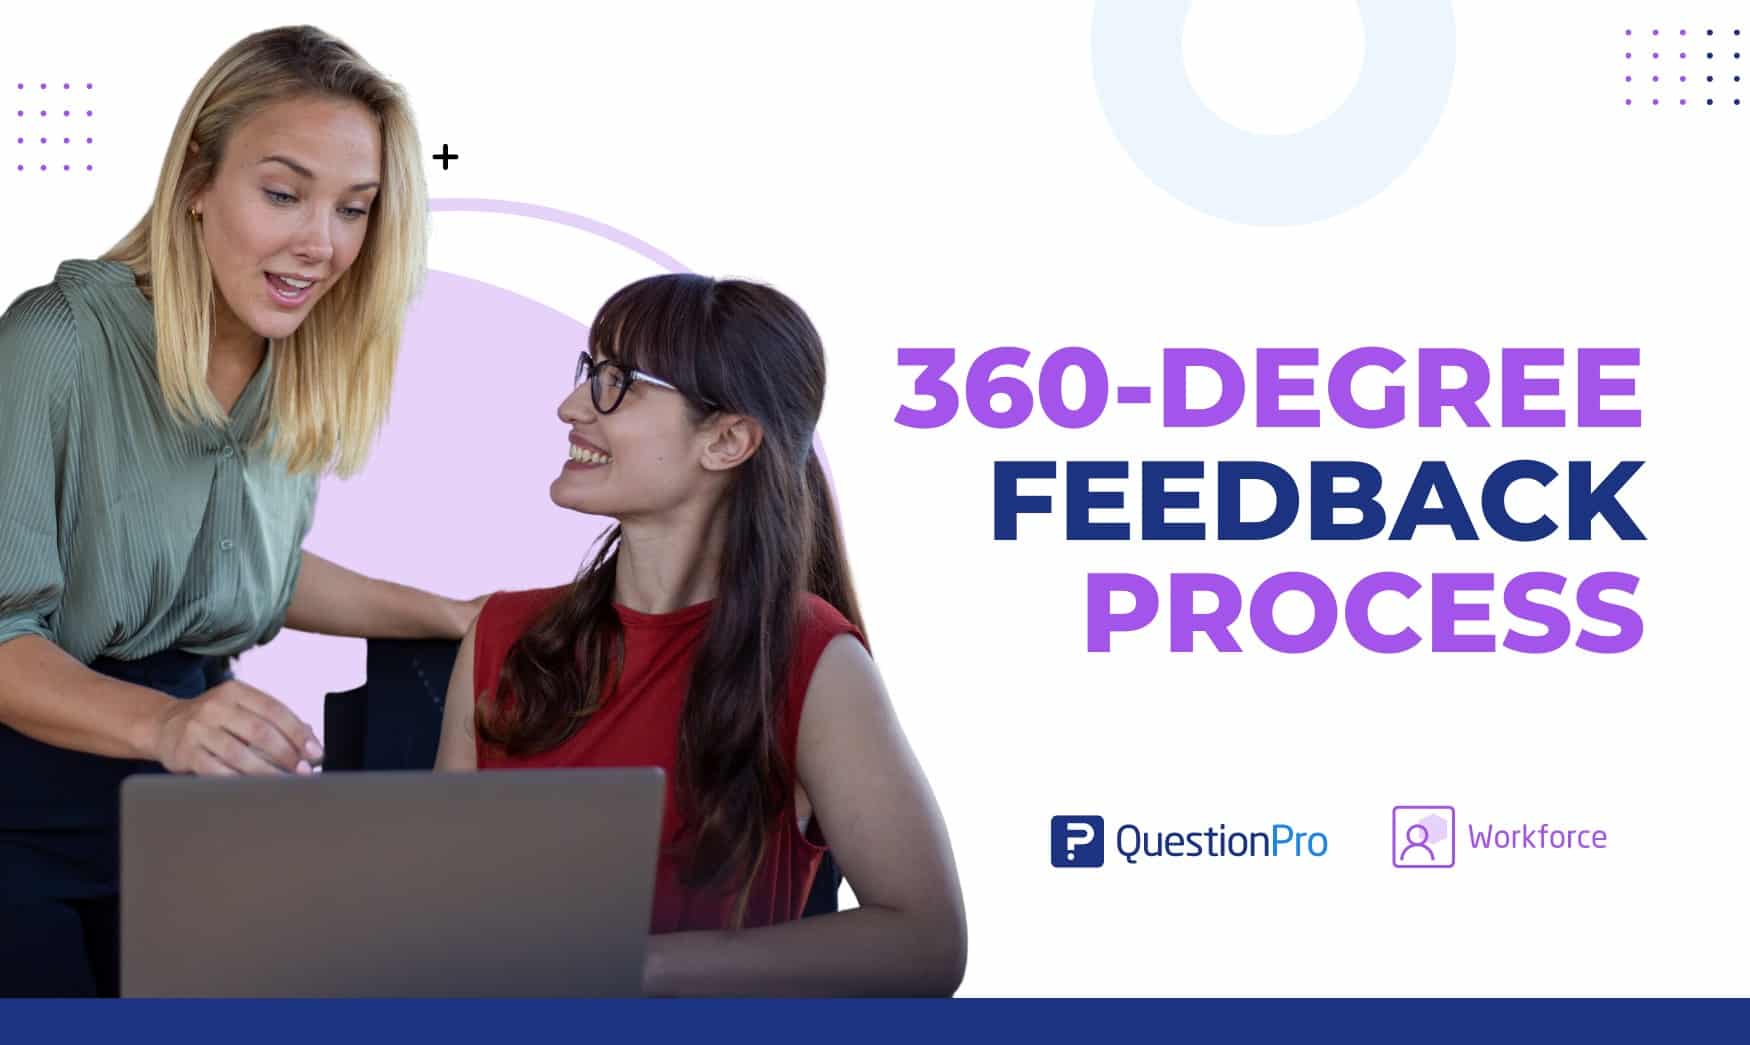 Uncover the potential of the 360 degree feedback process in shaping careers, collaboration, and propelling organizations to new heights.